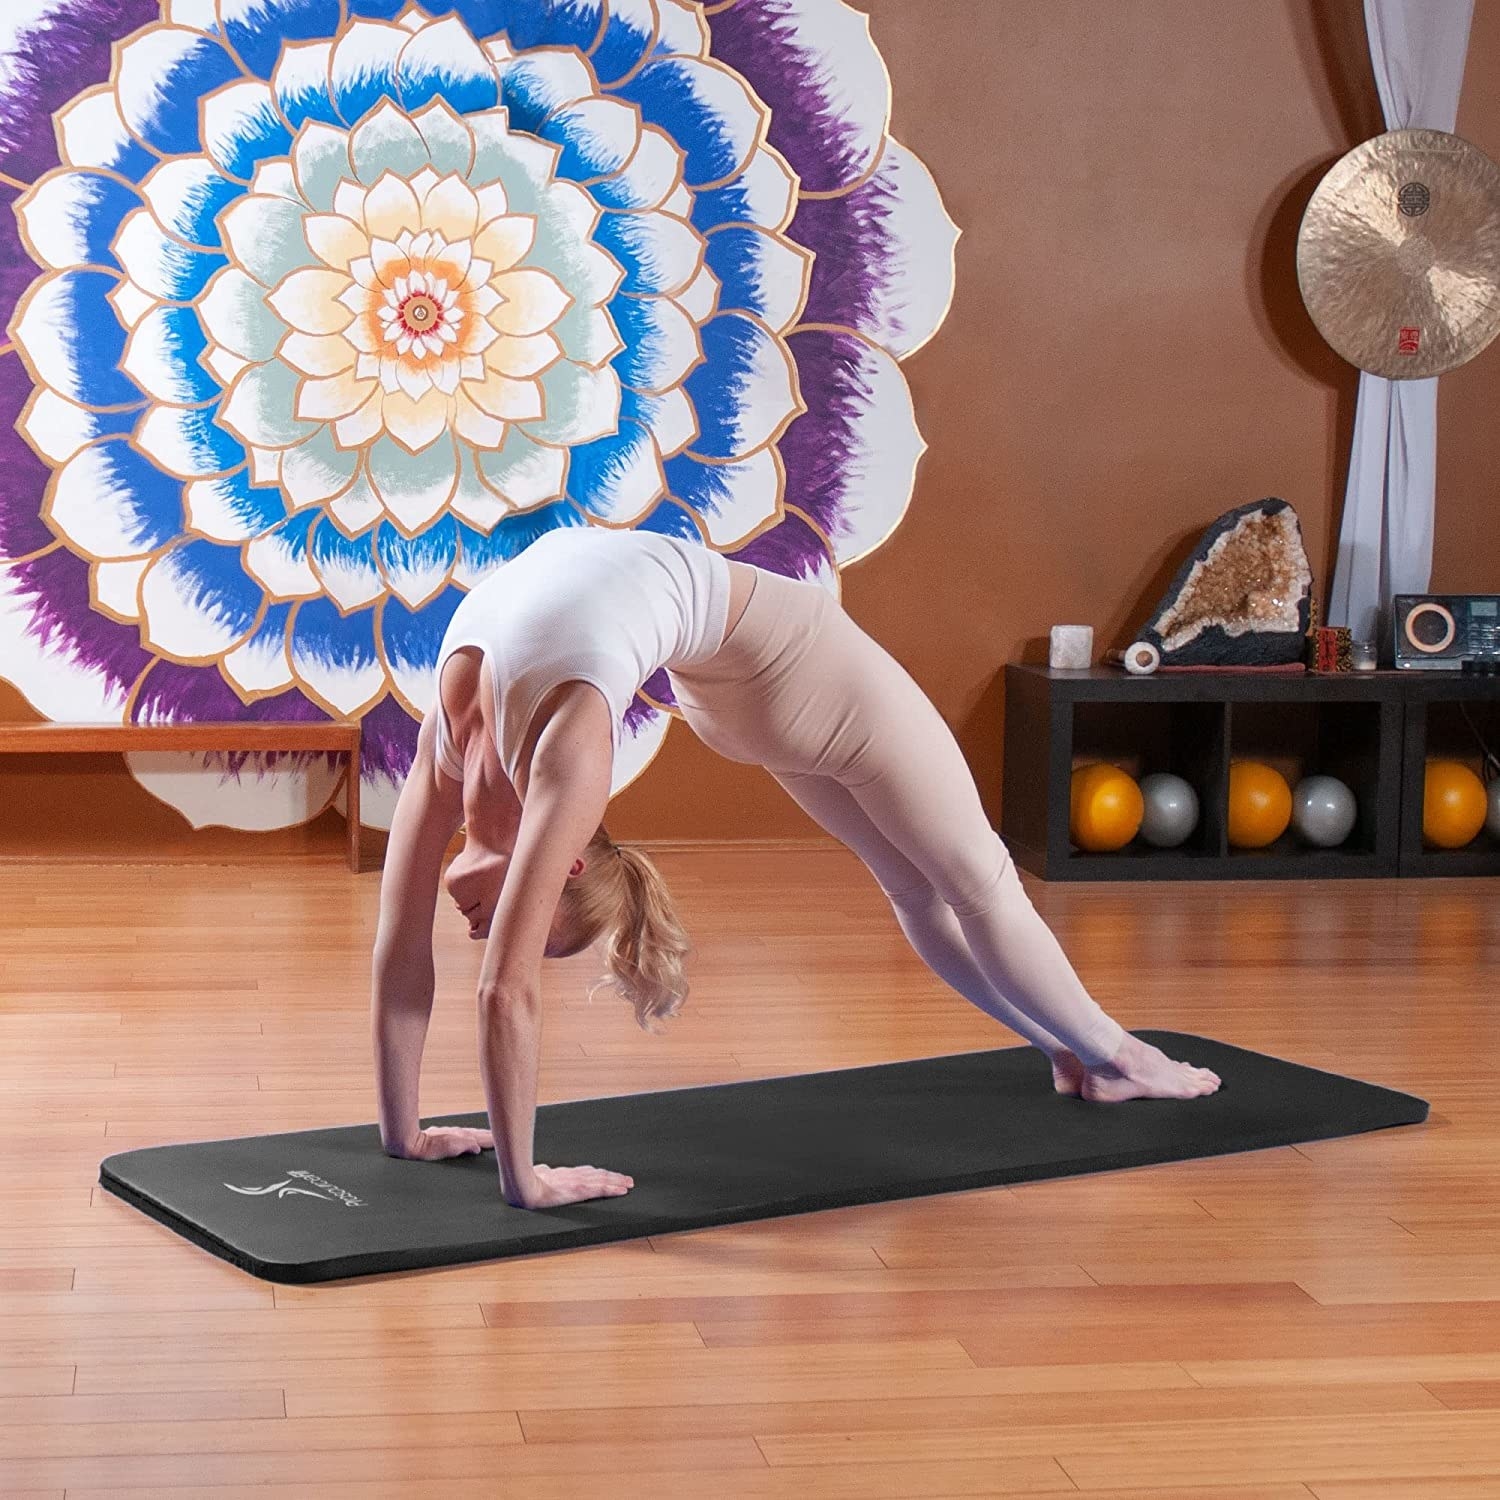 Someone doing a yoga pose on the mat in a studio